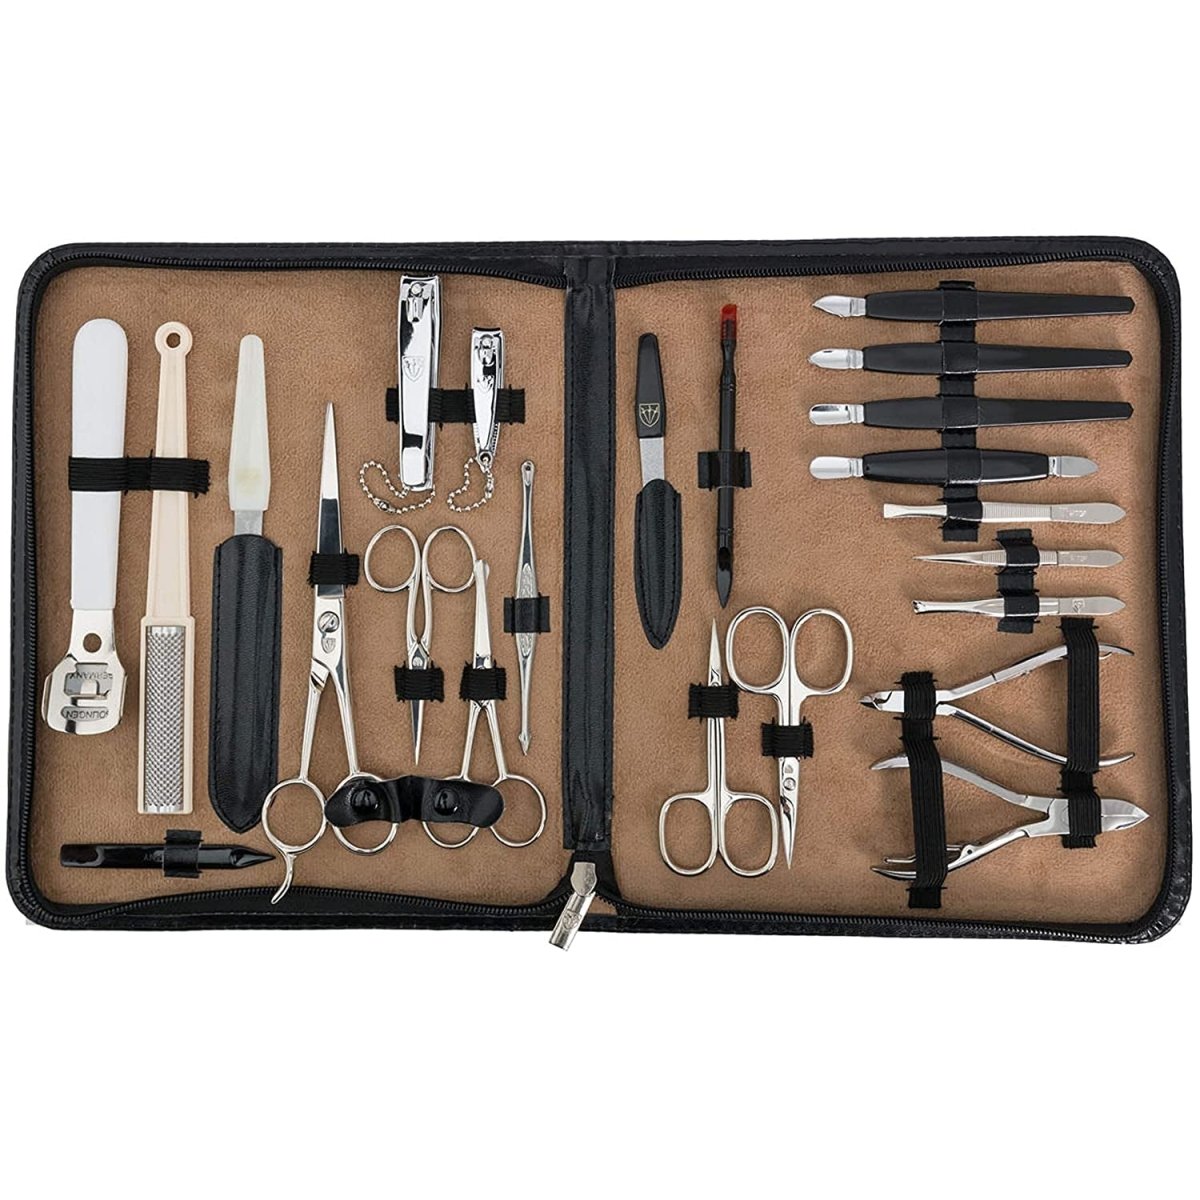 Manicure Pedicure Grooming Kit (23 Piece) - Shiny Nails